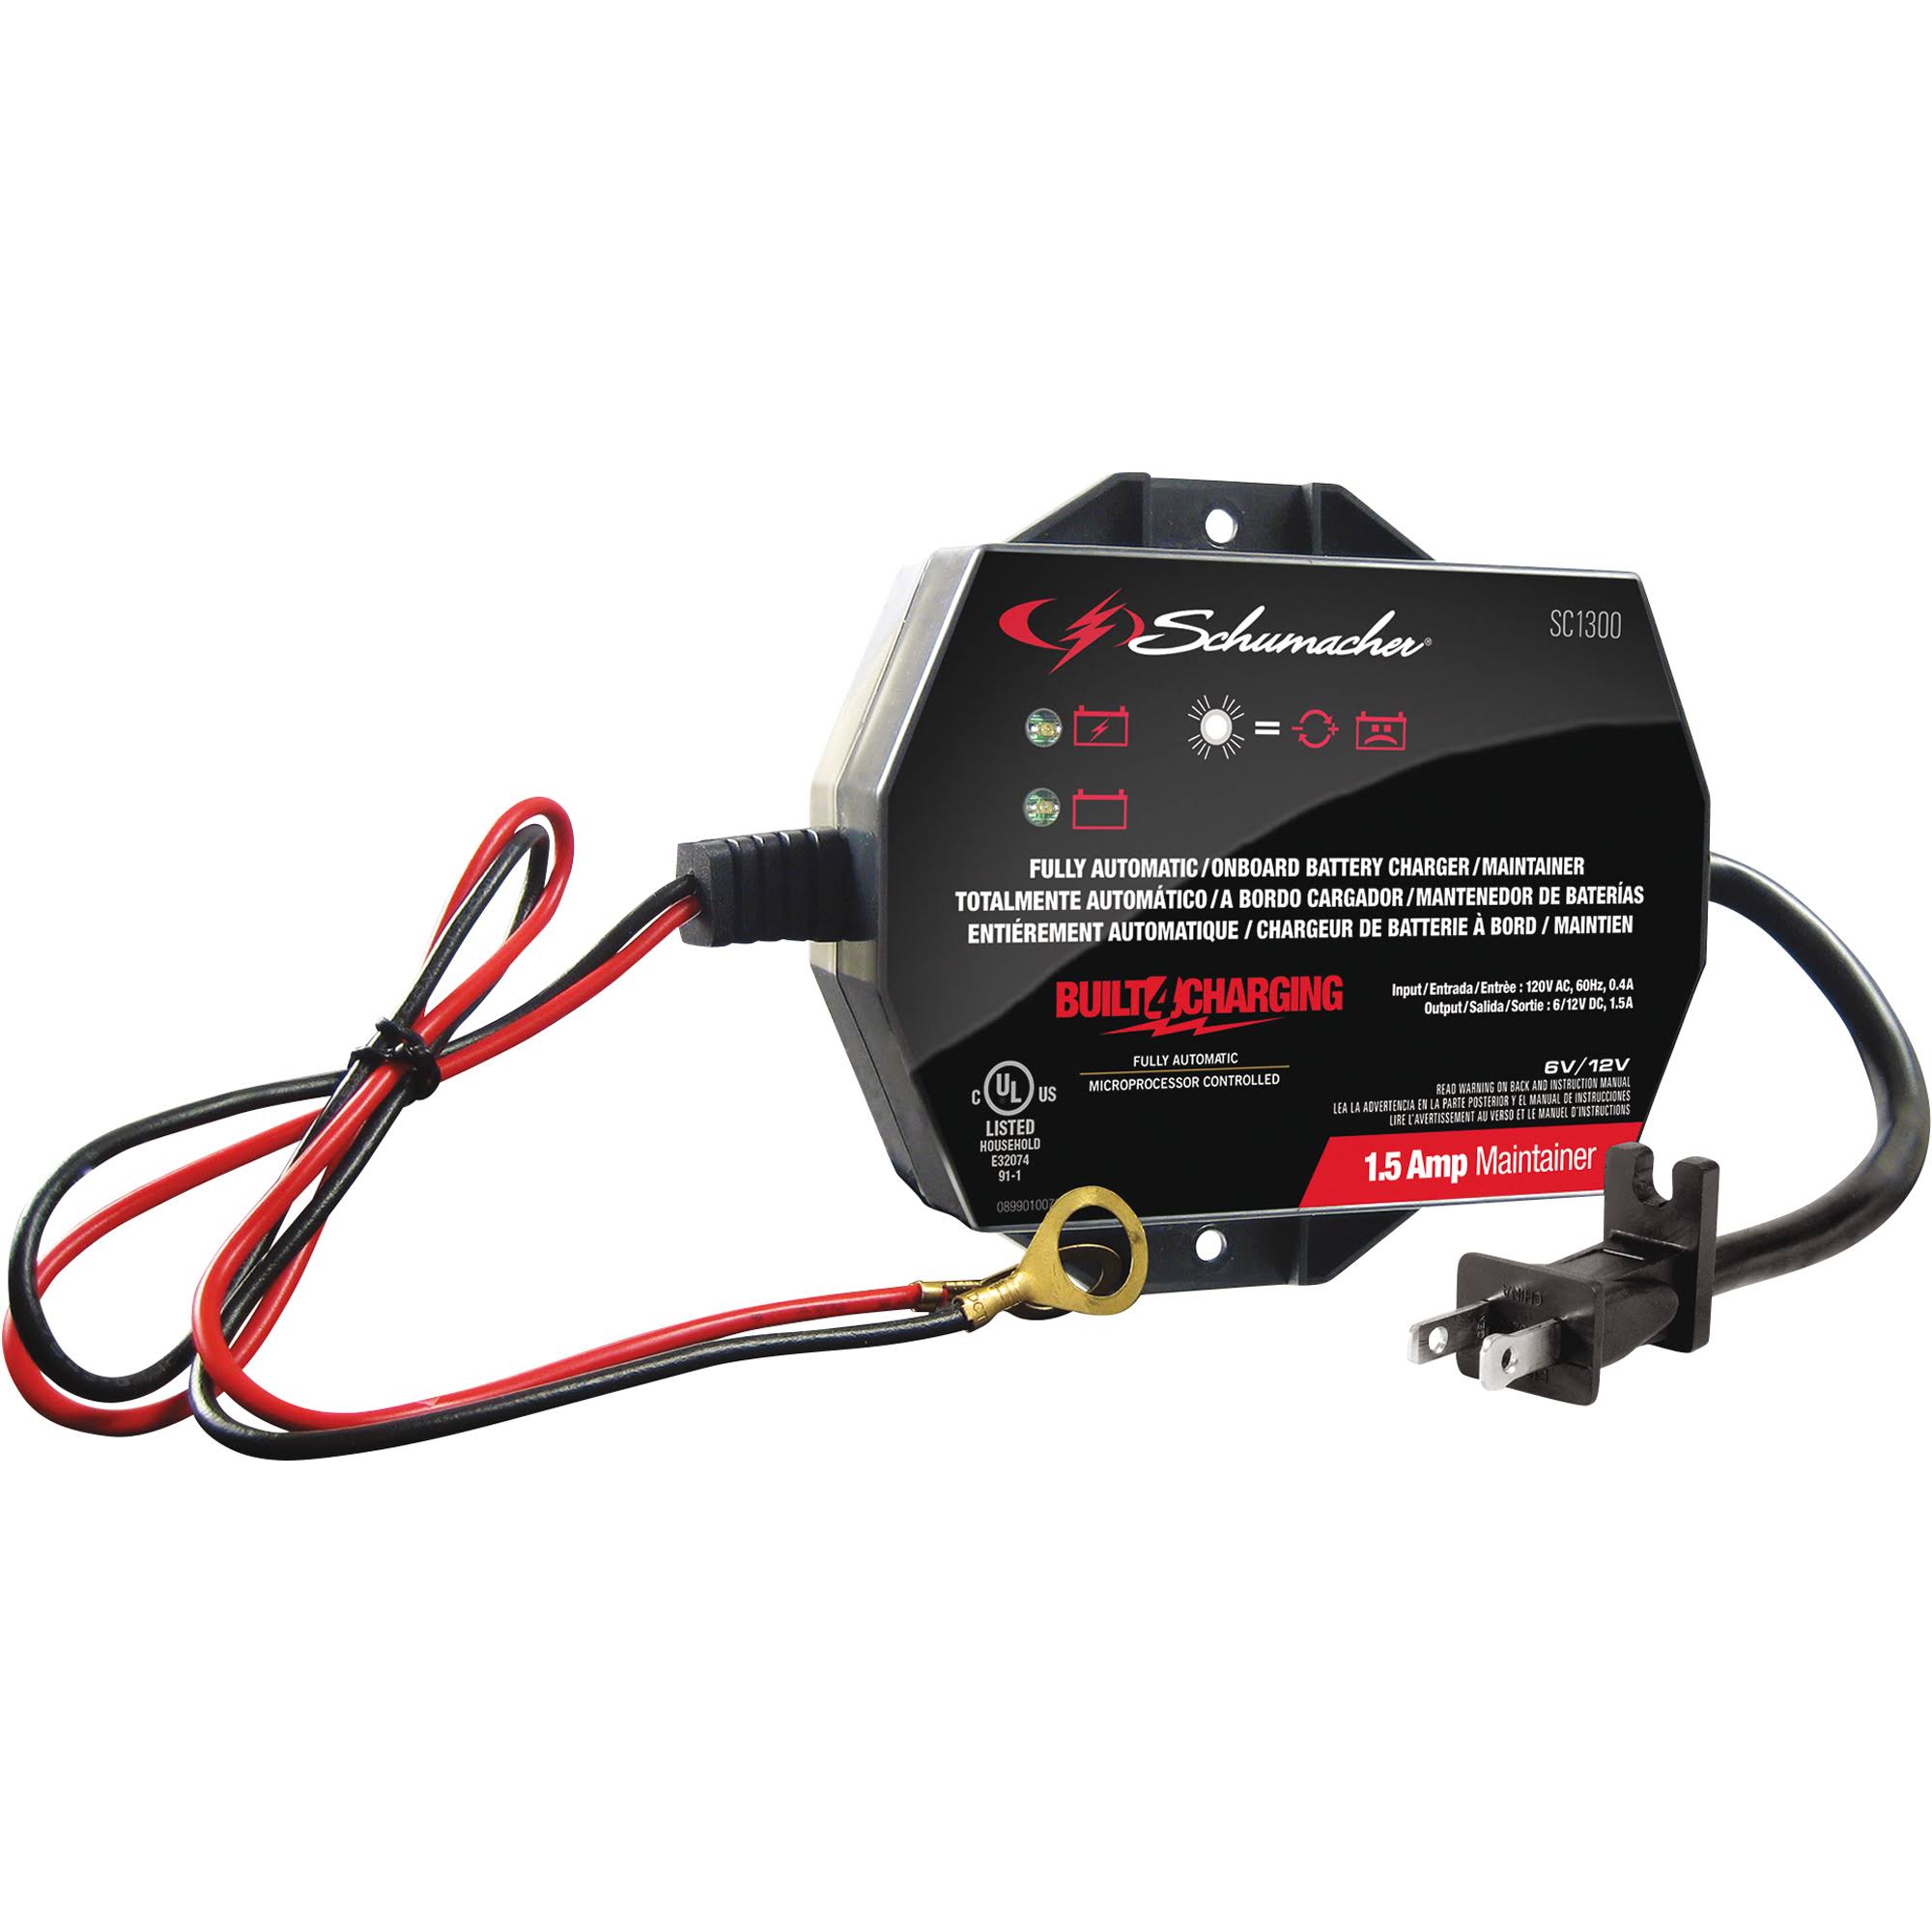 Schumacher Electric SC1300 1.5A 6V/12V Fully Automatic Battery Maintainer